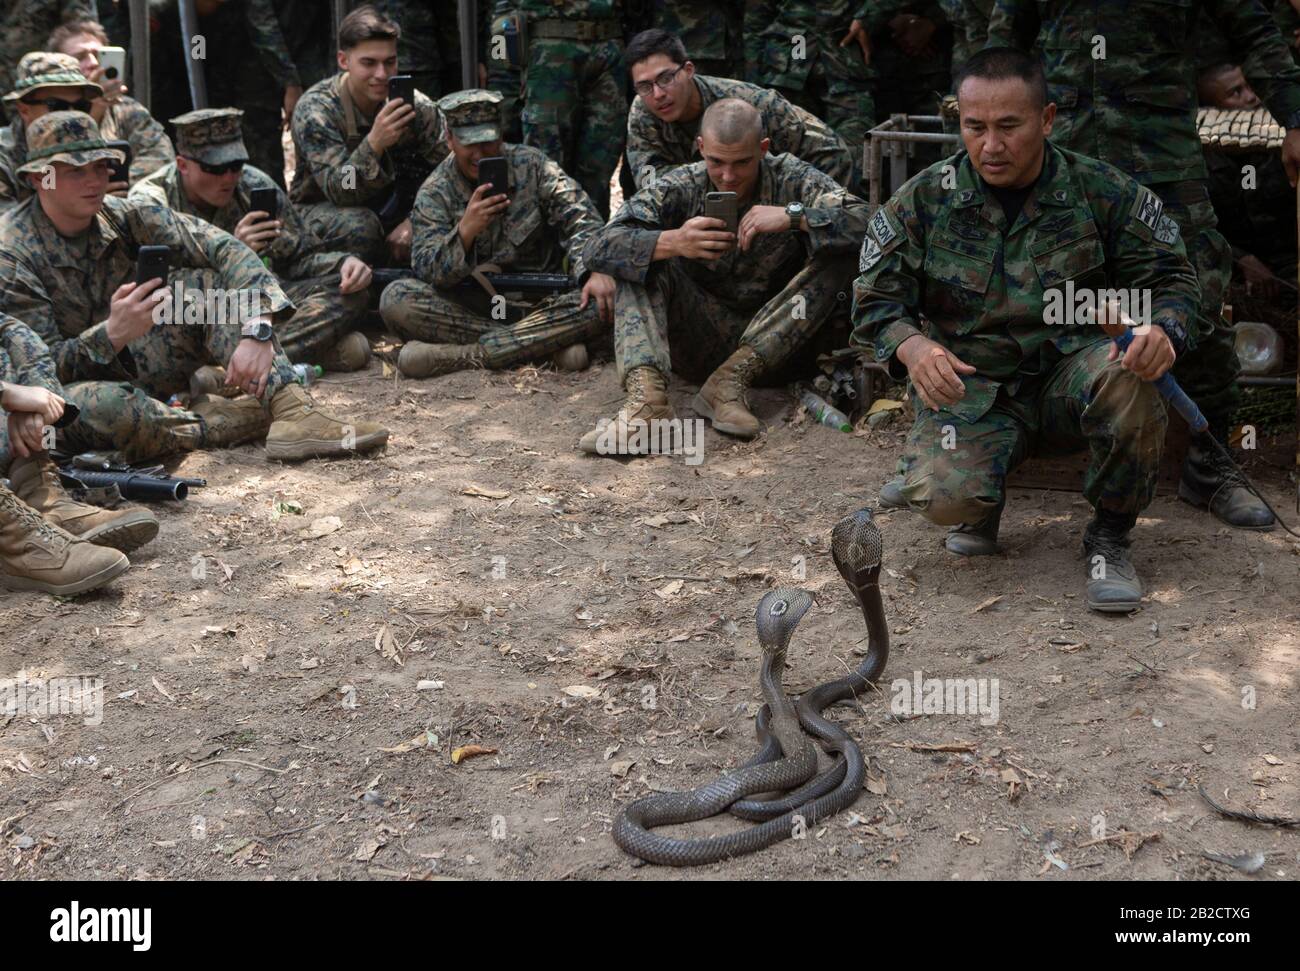 Ban Chan Khrem, Thailand. 02nd Mar, 2020. Royal Thai Marine CPO First Class Pairoj Prasarnsai demonstrates how to handle a king cobra as part of jungle survival training during exercise Cobra Gold 2020 March 2, 2020 in Ban Chan Khrem, Chanthaburi, Thailand. The Marines learned essential skills necessary for surviving in a jungle environment, such as making a fire, eating plants and alternative ways to stay hydrated. Credit: Hannah Hall/Planetpix/Alamy Live News Credit: Planetpix/Alamy Live News Stock Photo